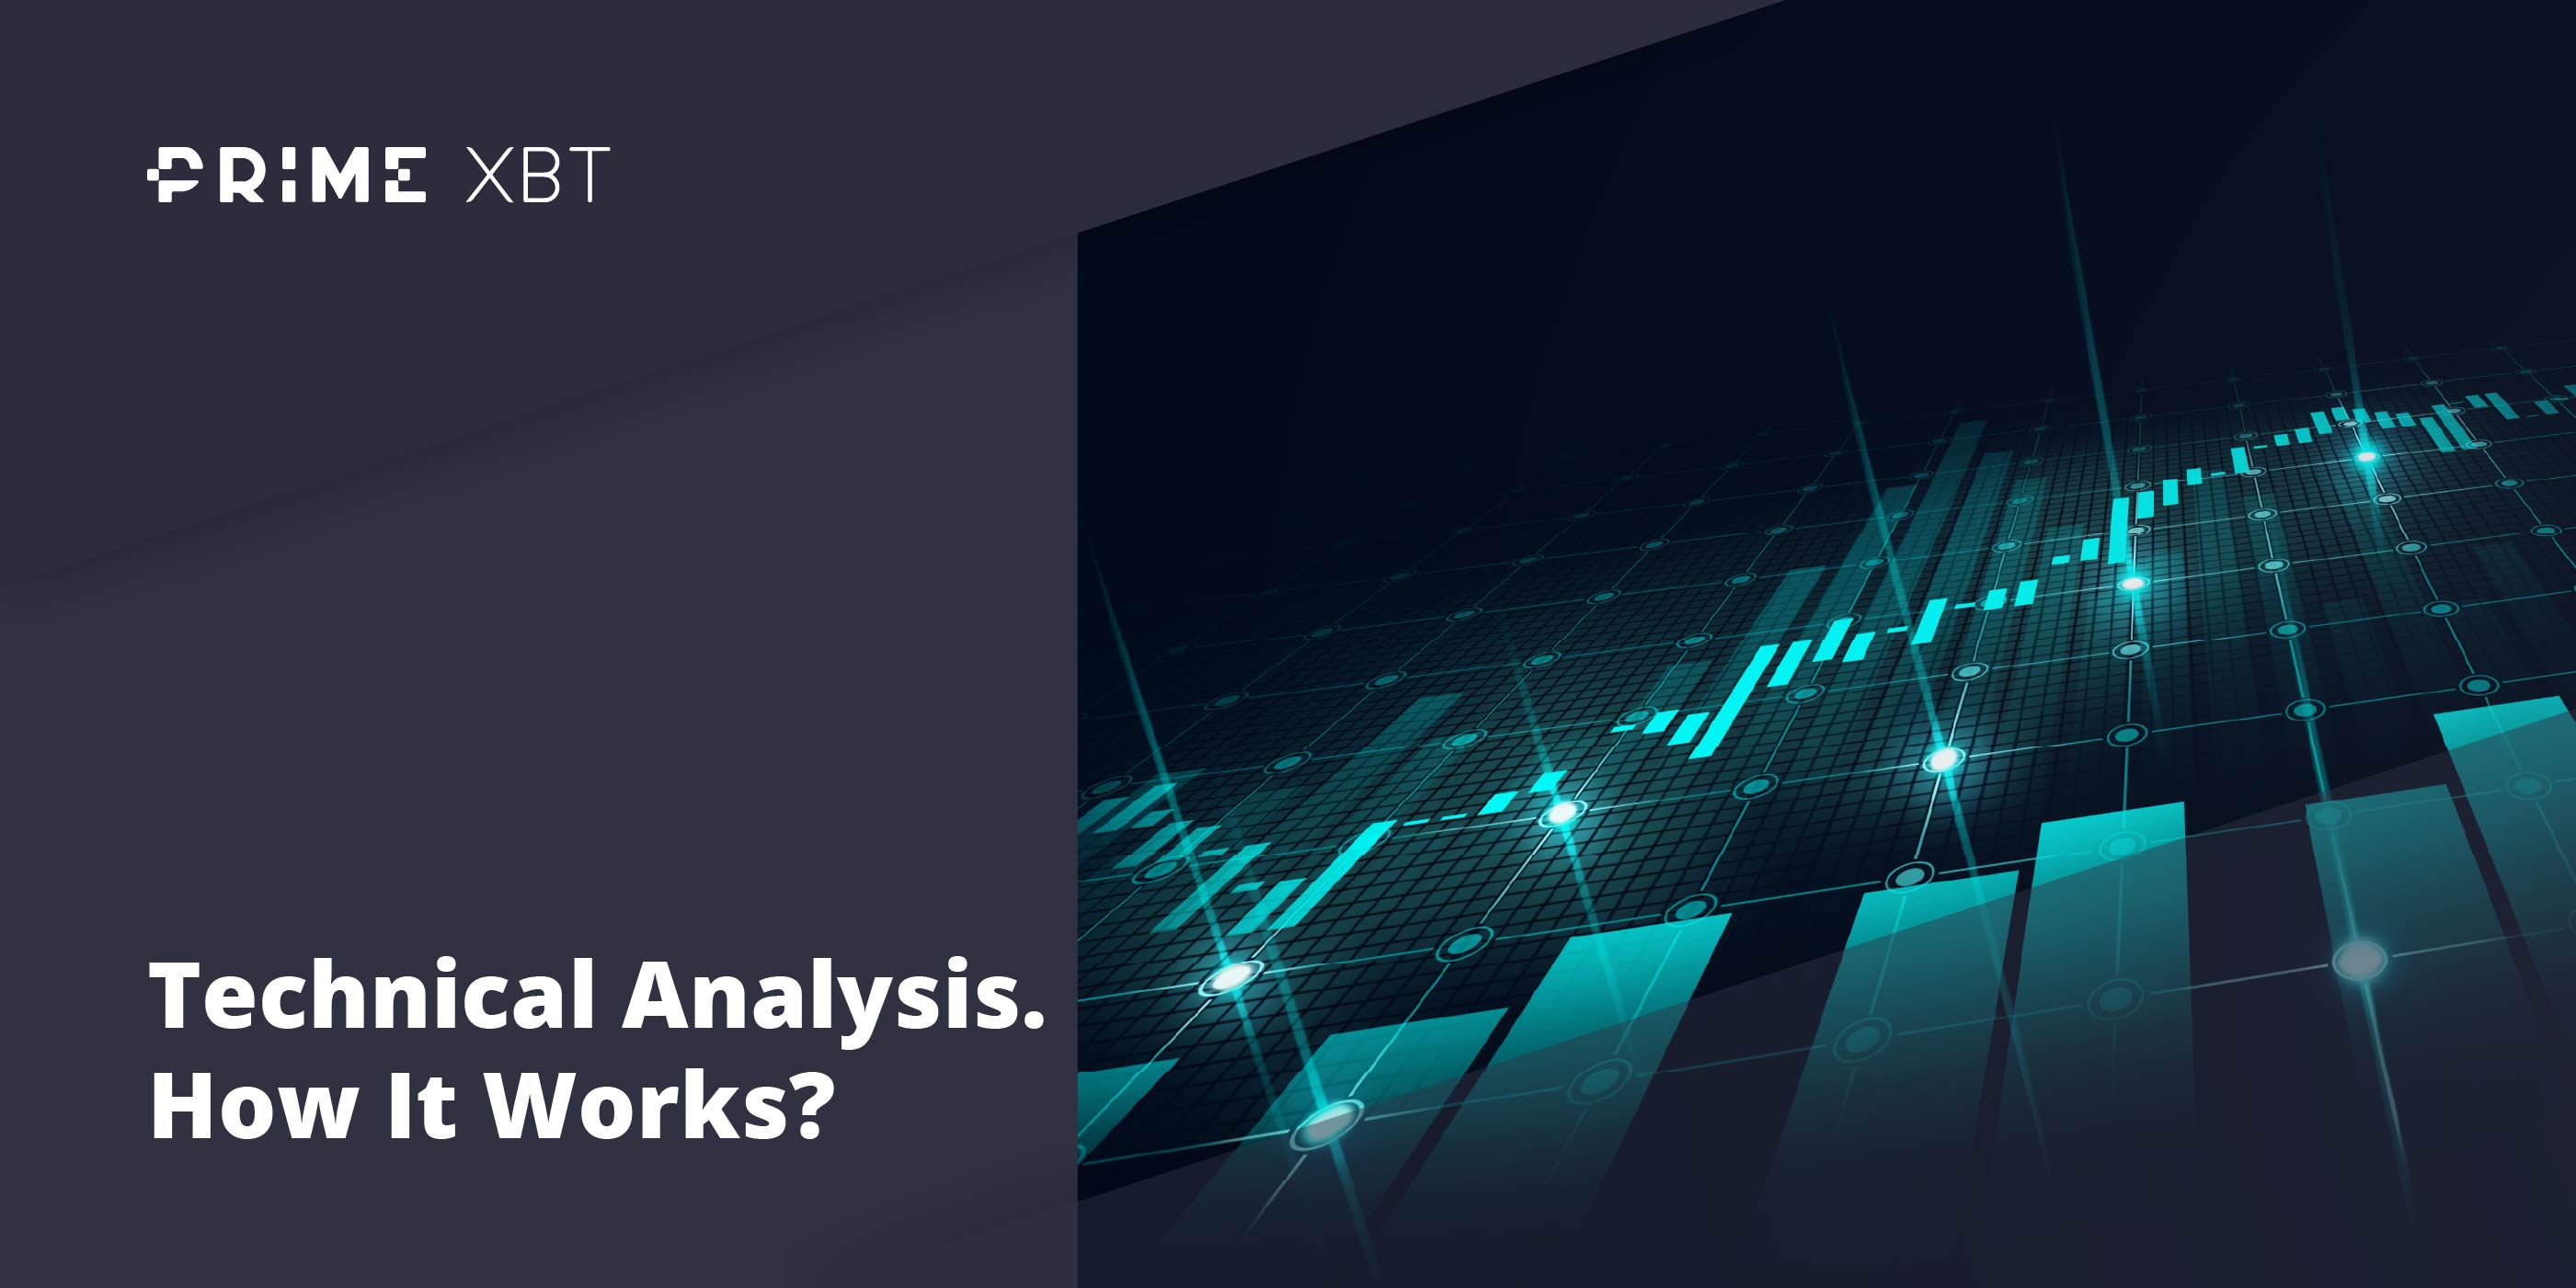 Technical Analysis: Definition, Tools & Examples - 26.11.19